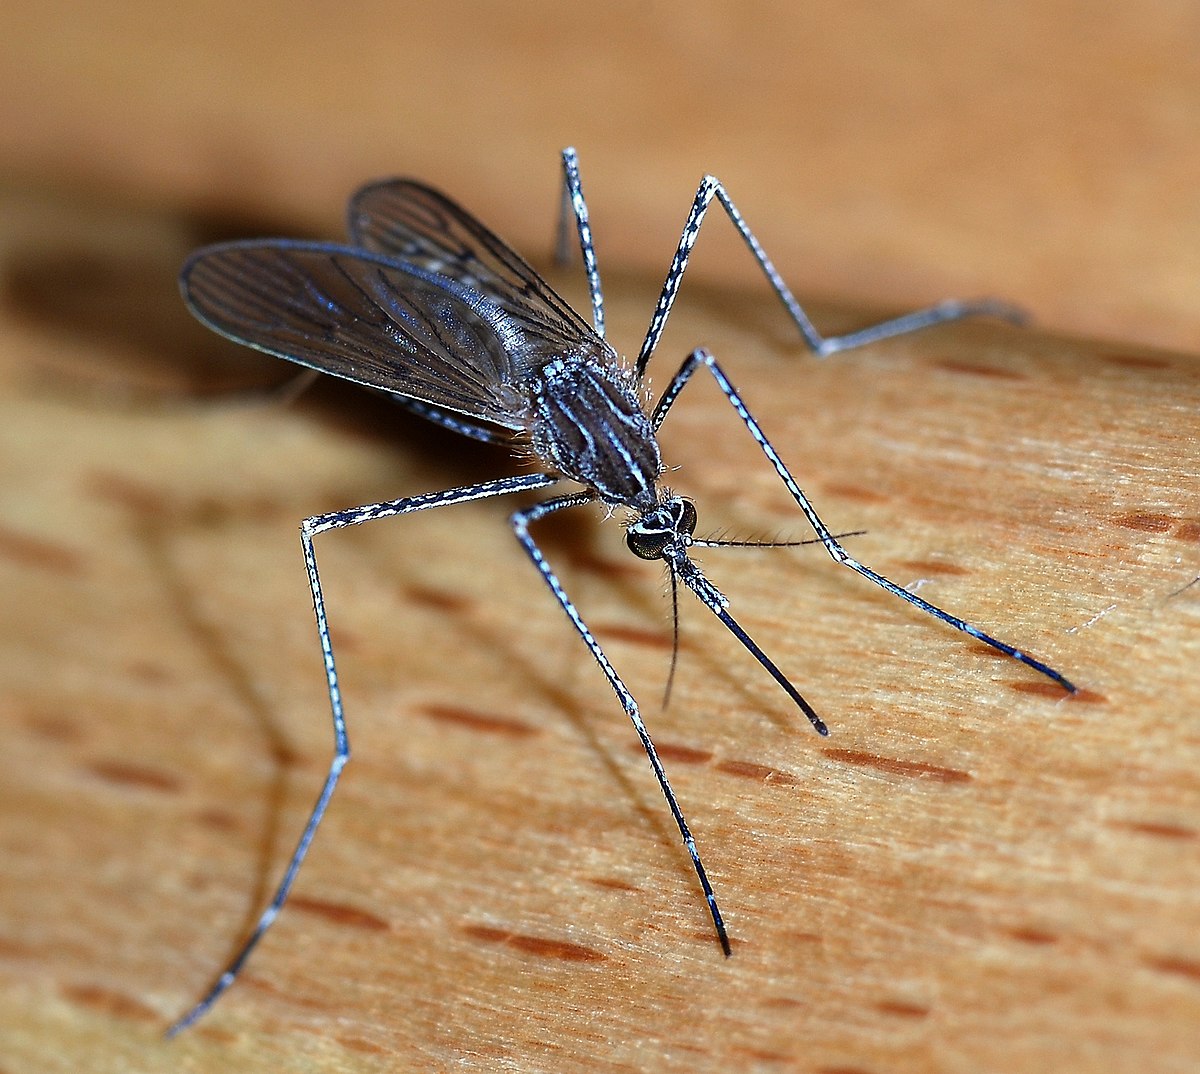 Do mosquitoes turn into flies?